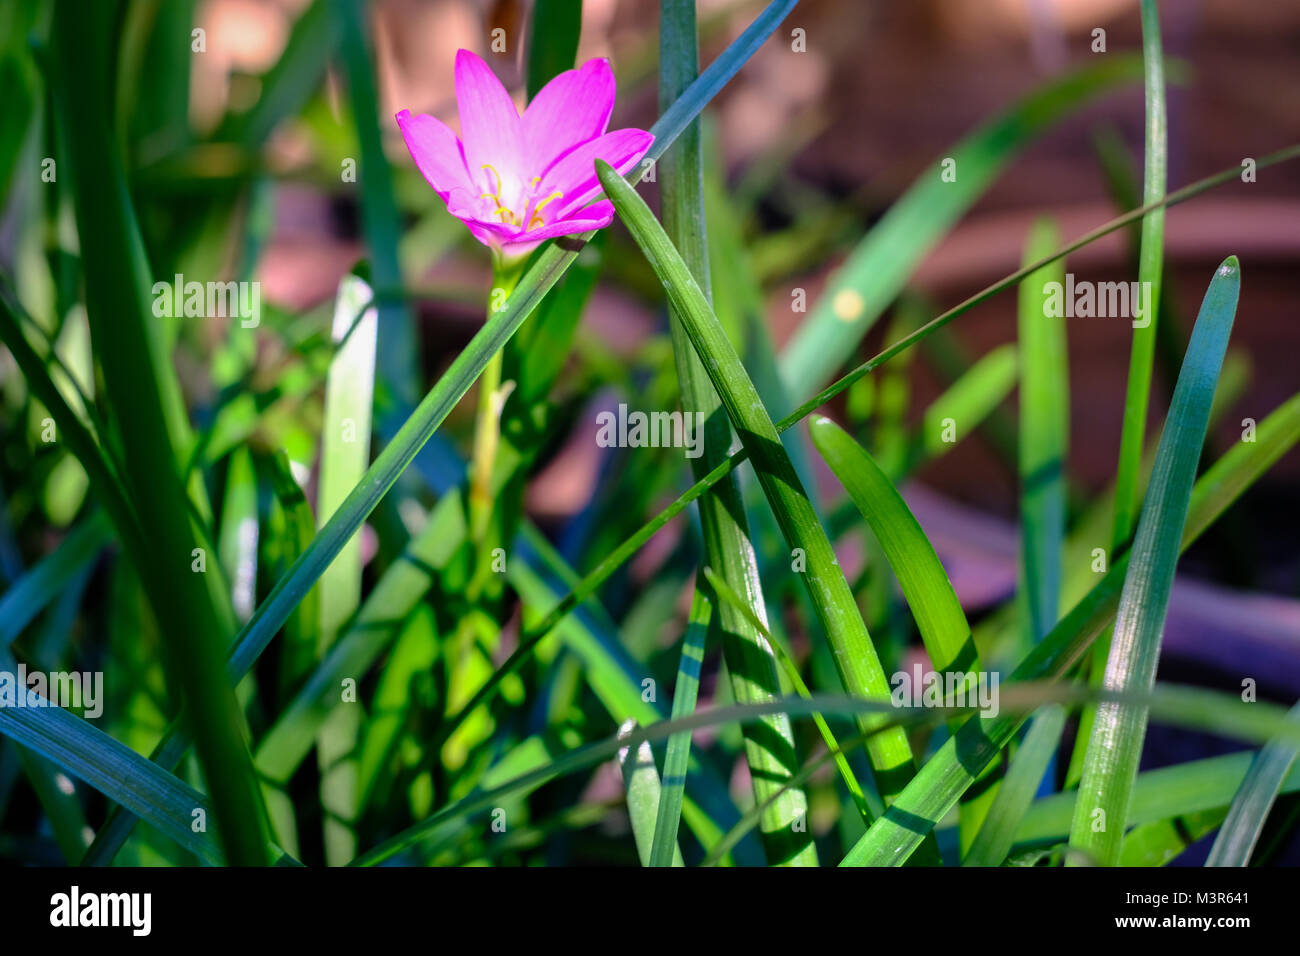 Pink Zephyranthes flower, close up, Common names for species in this genus include fairy, rainflower, zephyr and rain lily, on a nature background Stock Photo